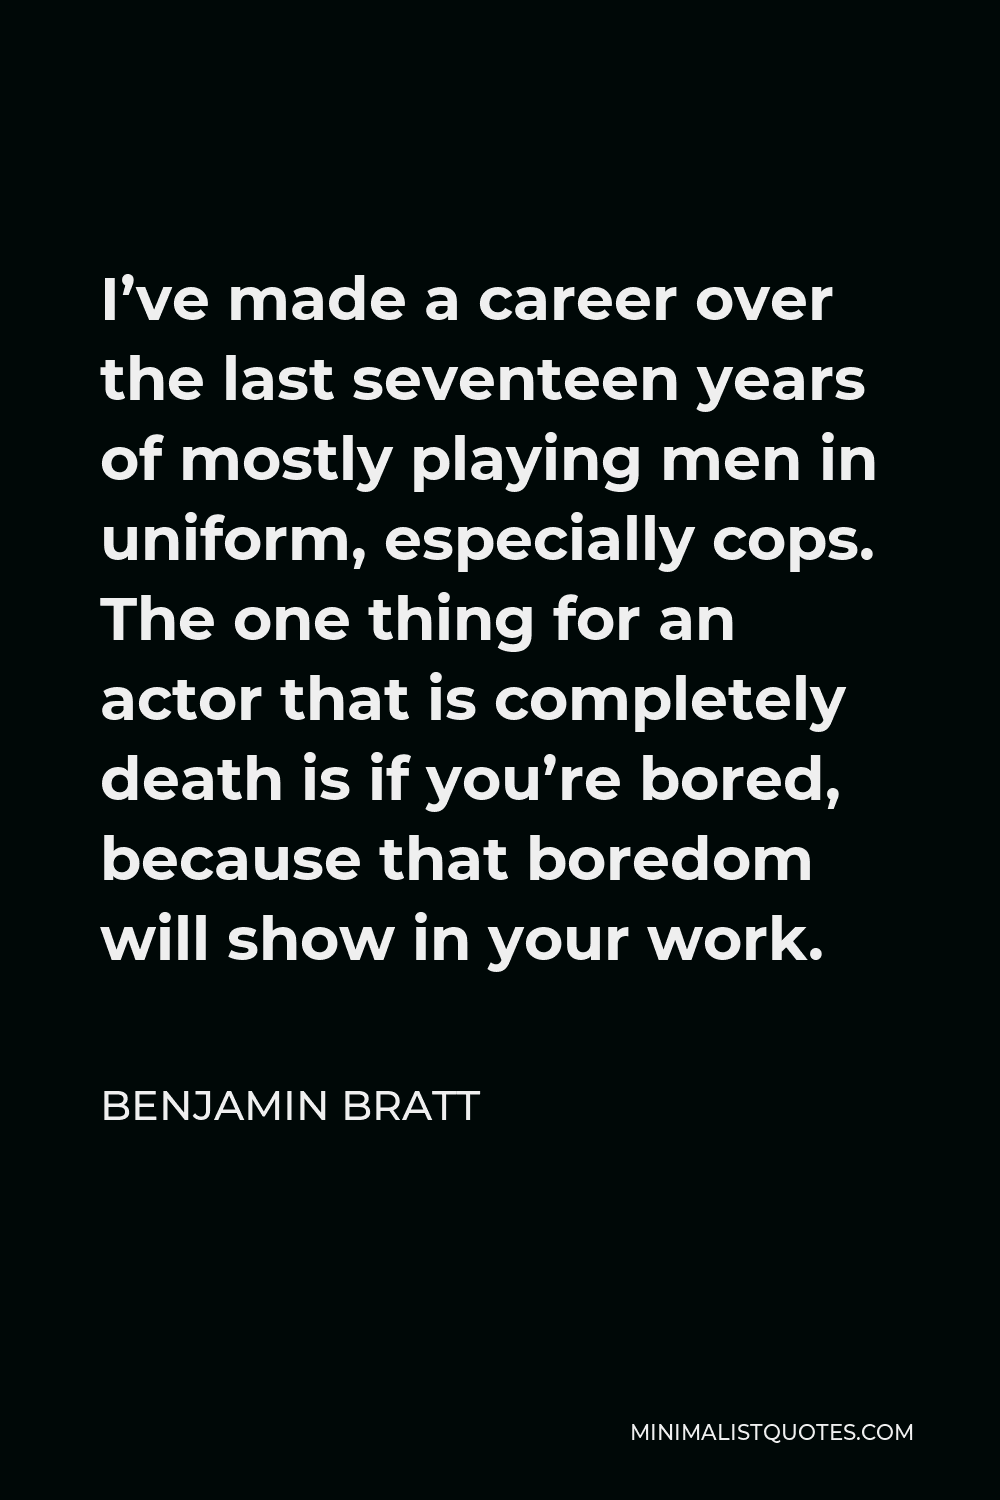 Benjamin Bratt Quote - I’ve made a career over the last seventeen years of mostly playing men in uniform, especially cops. The one thing for an actor that is completely death is if you’re bored, because that boredom will show in your work.